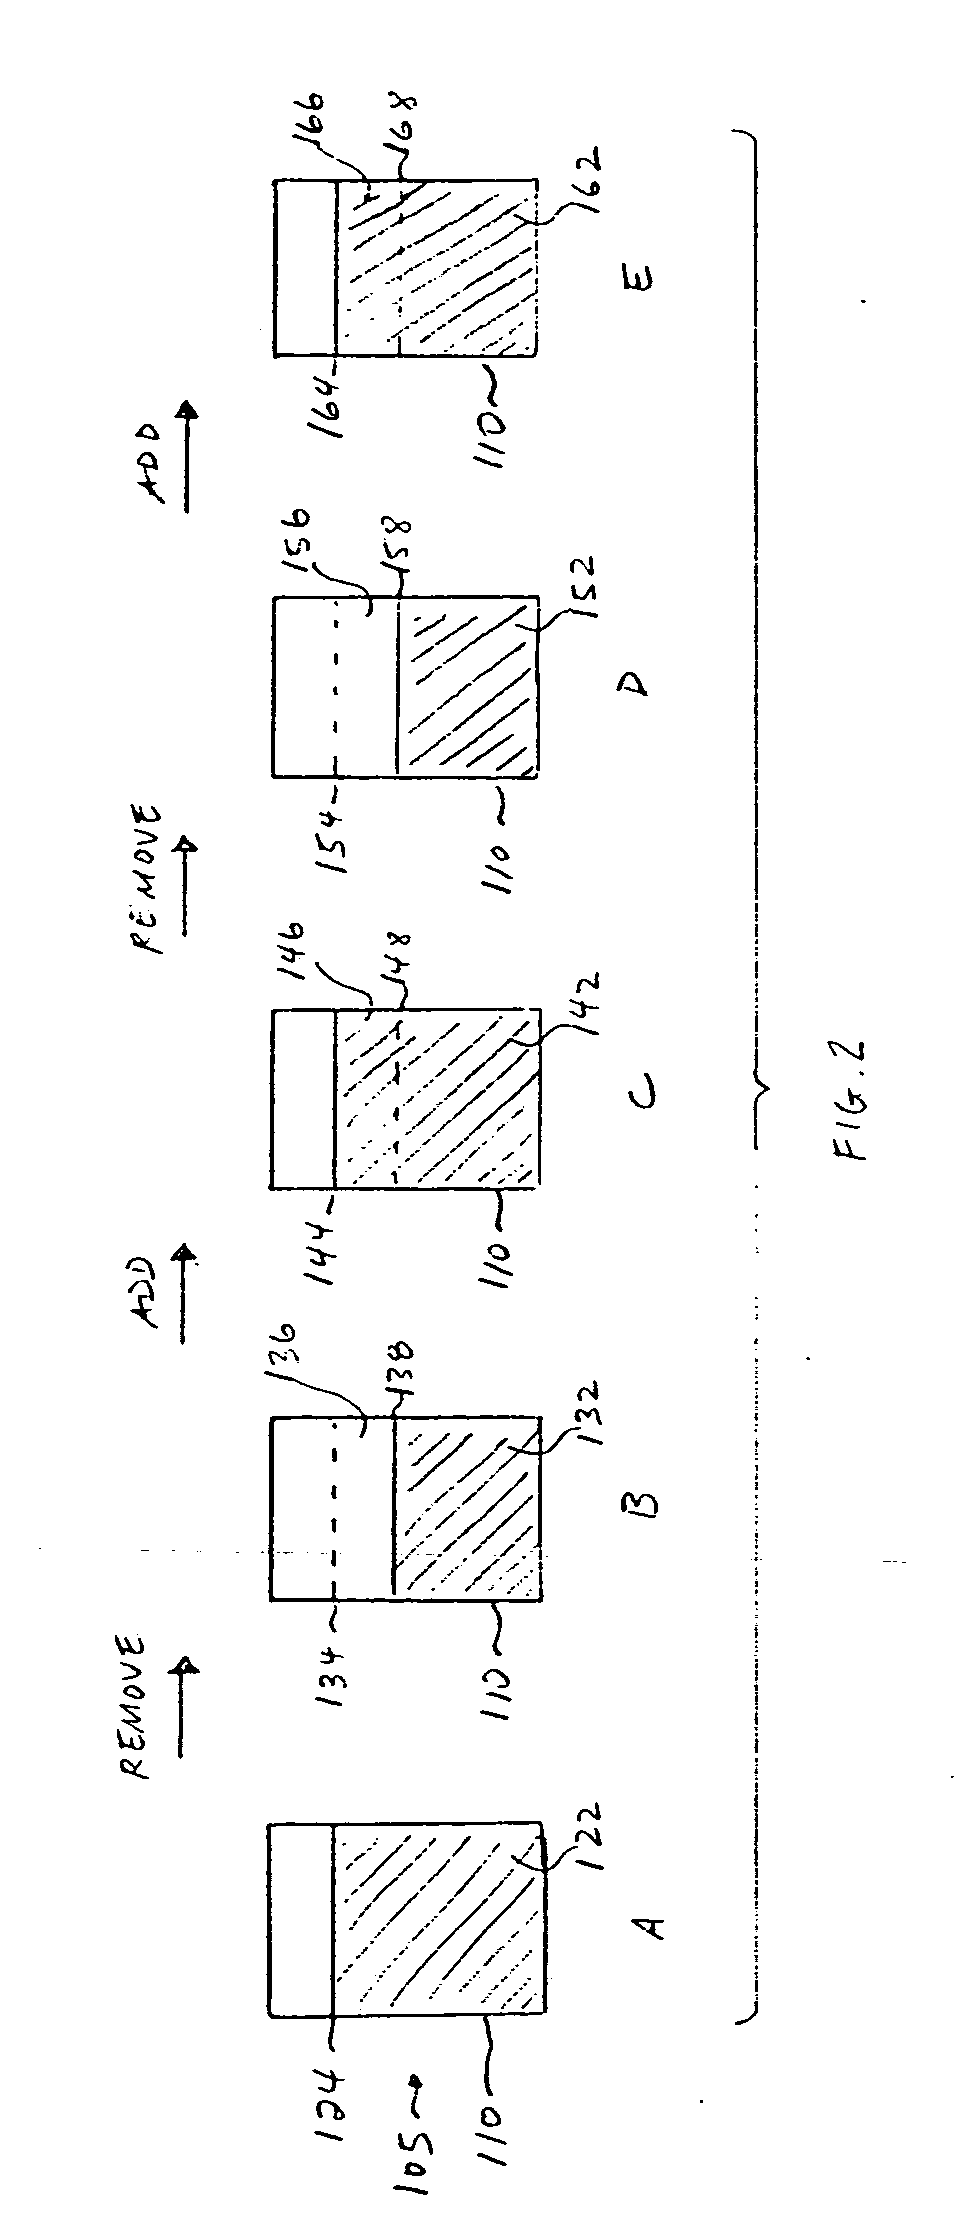 Method for performing fed-batch operations in small volume reactors